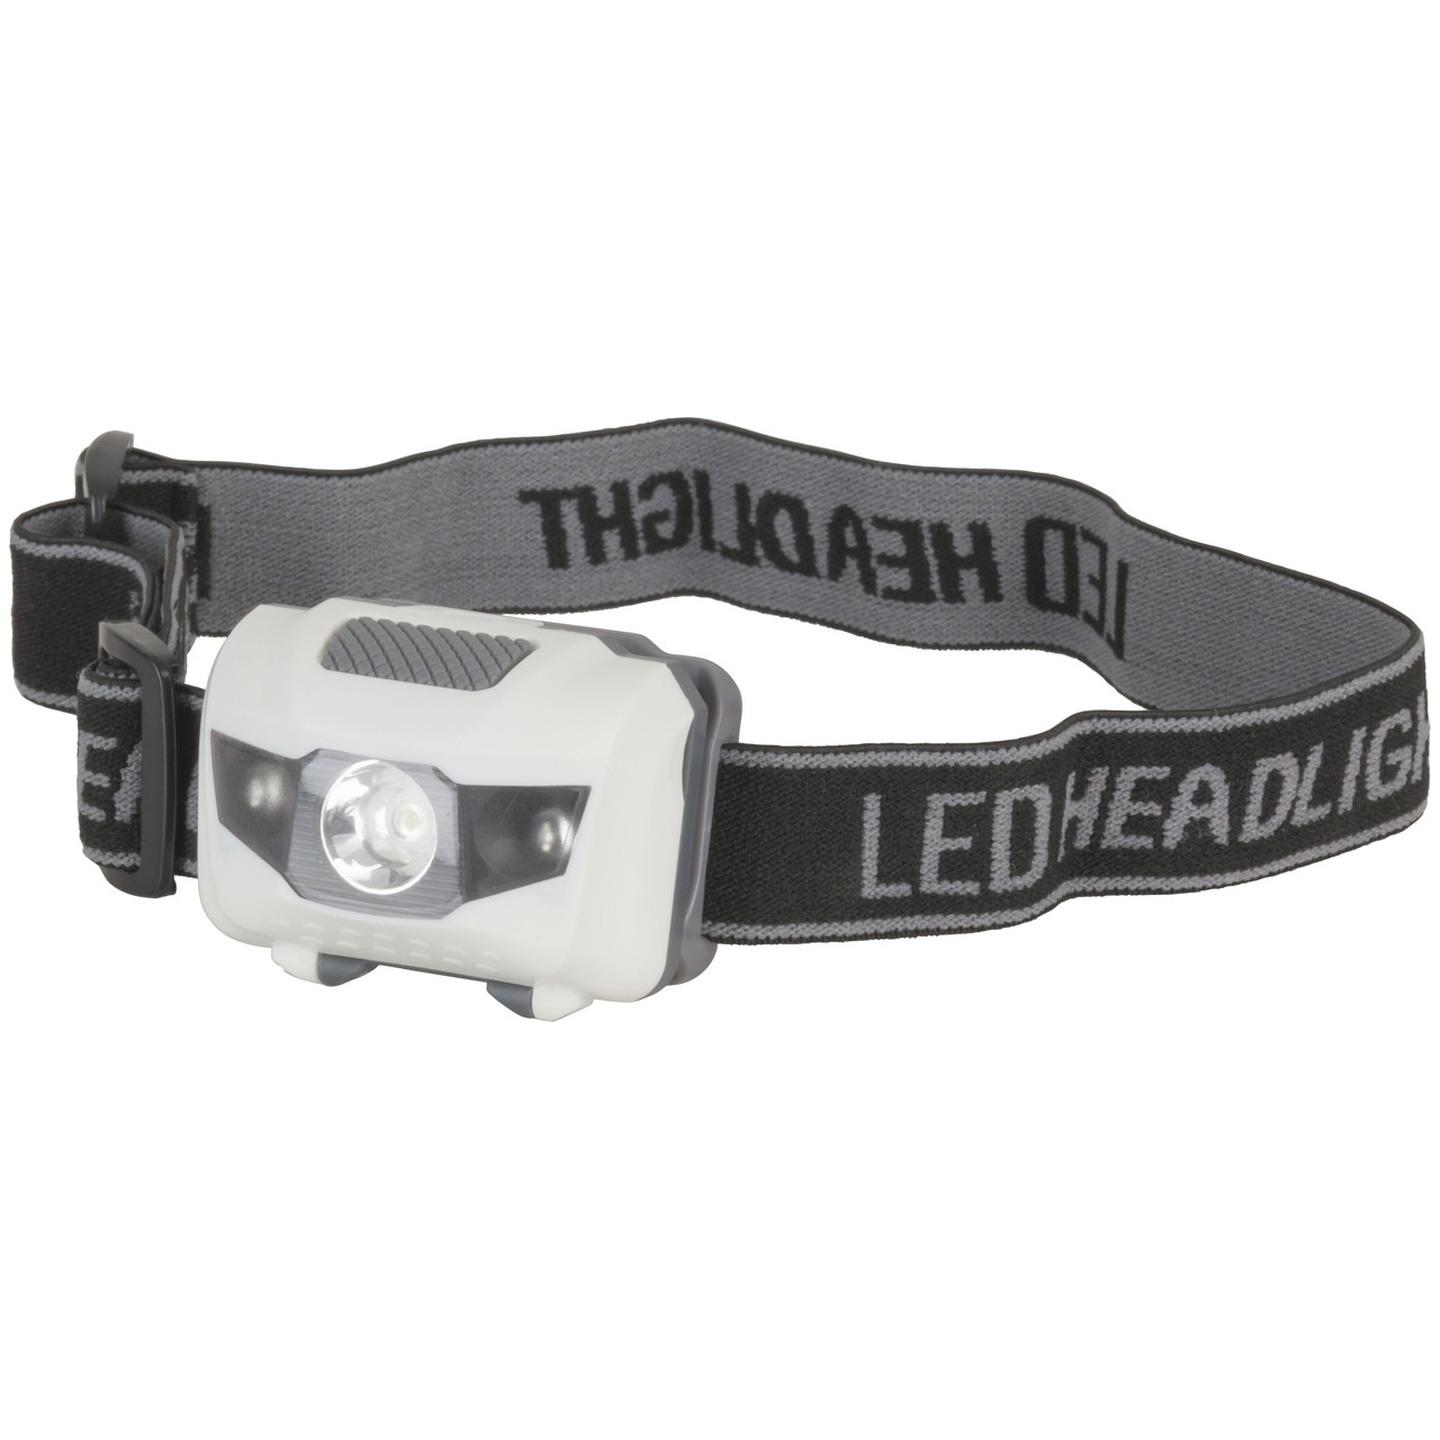 3W LED Head Torch with 2 Red LEDs